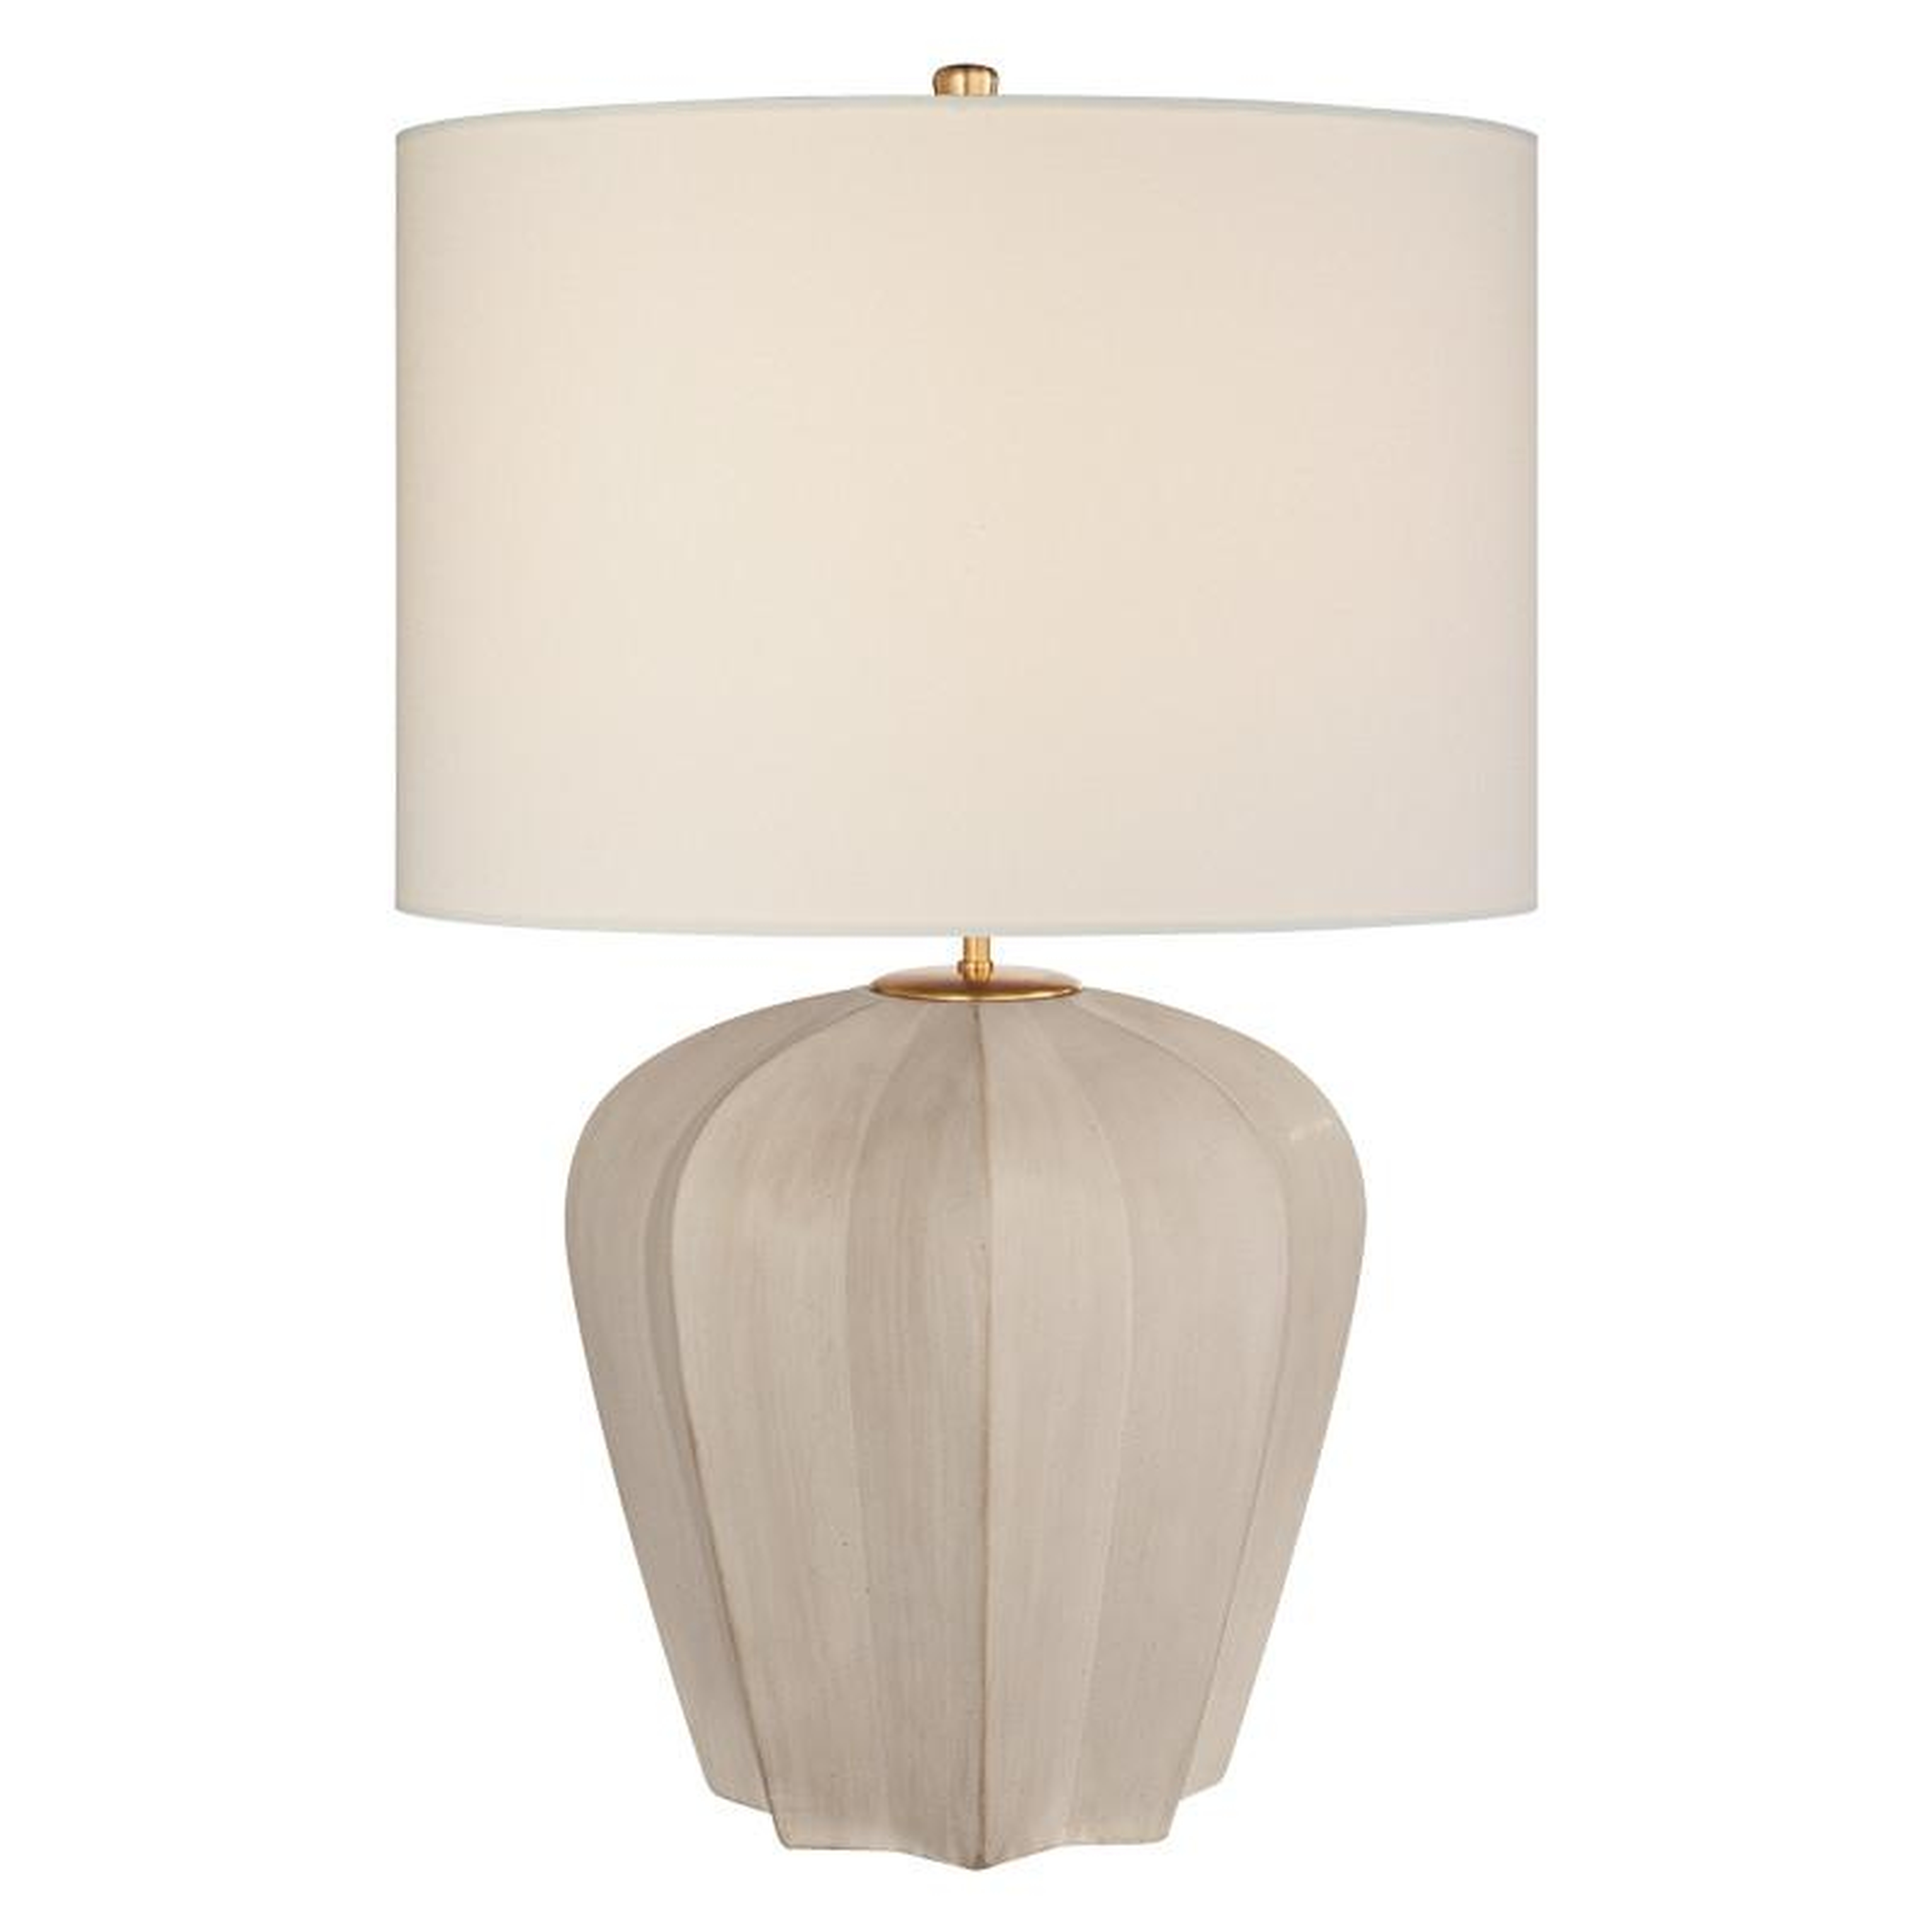 Pierrepont Table Lamp - McGee & Co.